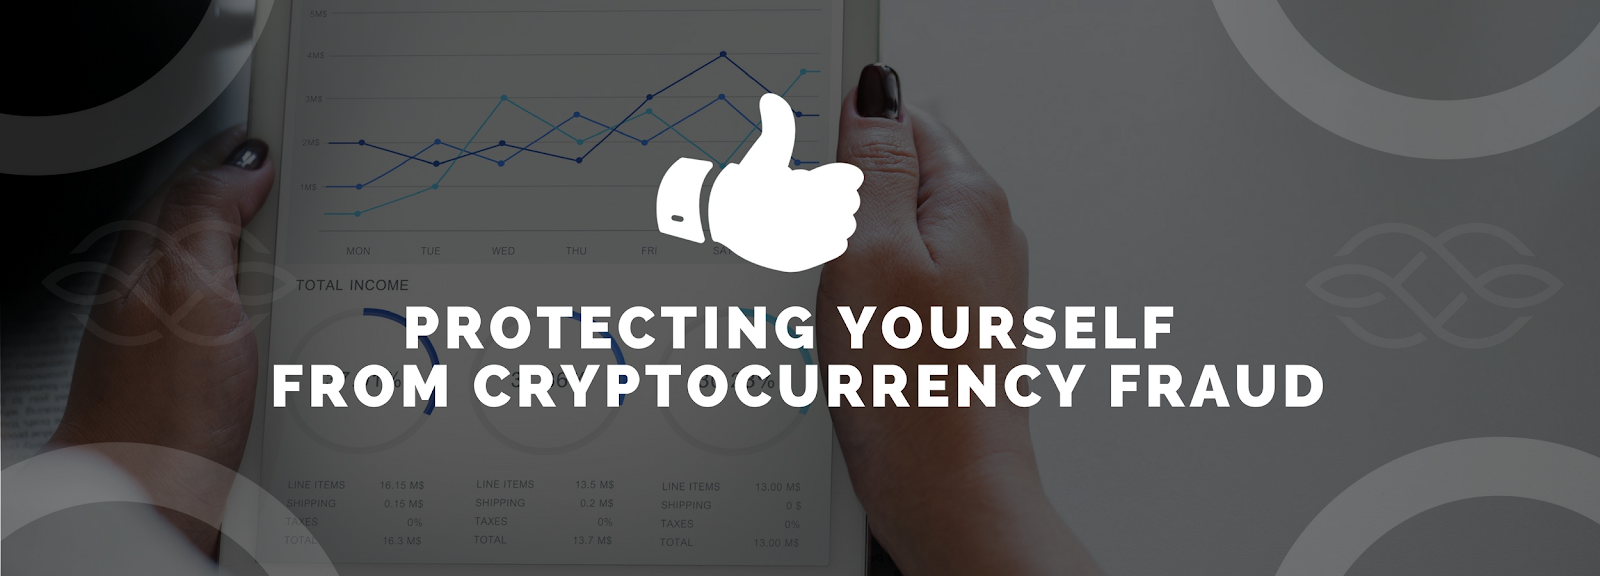 Protecting Yourself From Cryptocurrency Fraud